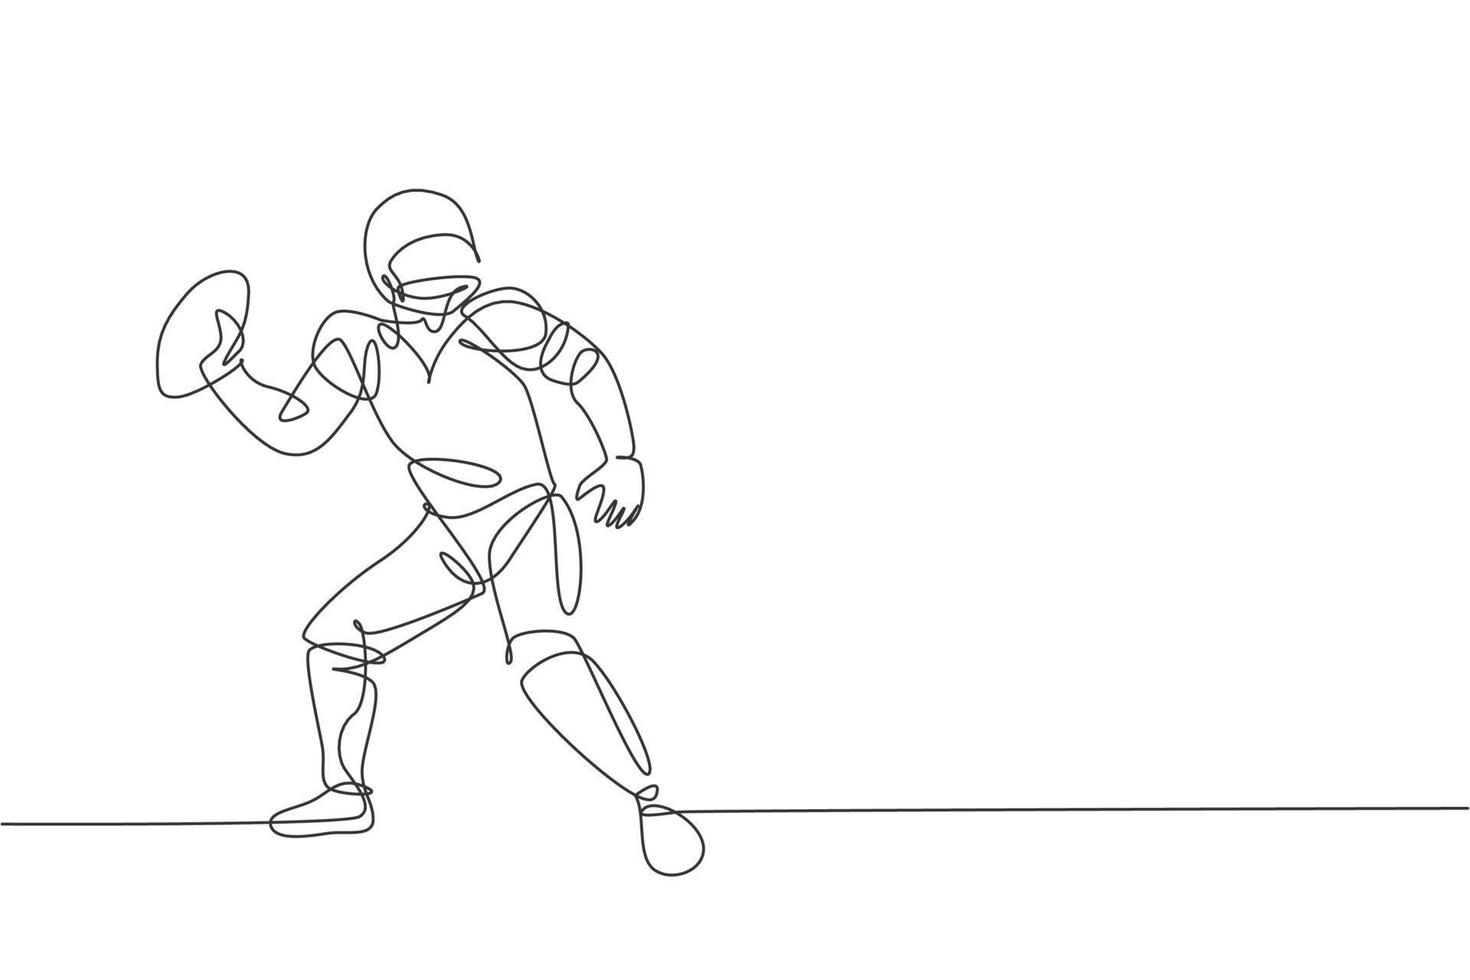 One single line drawing of energetic american football player stance to throw the ball for national league promotion. Sport competition concept. Modern continuous line draw design vector illustration